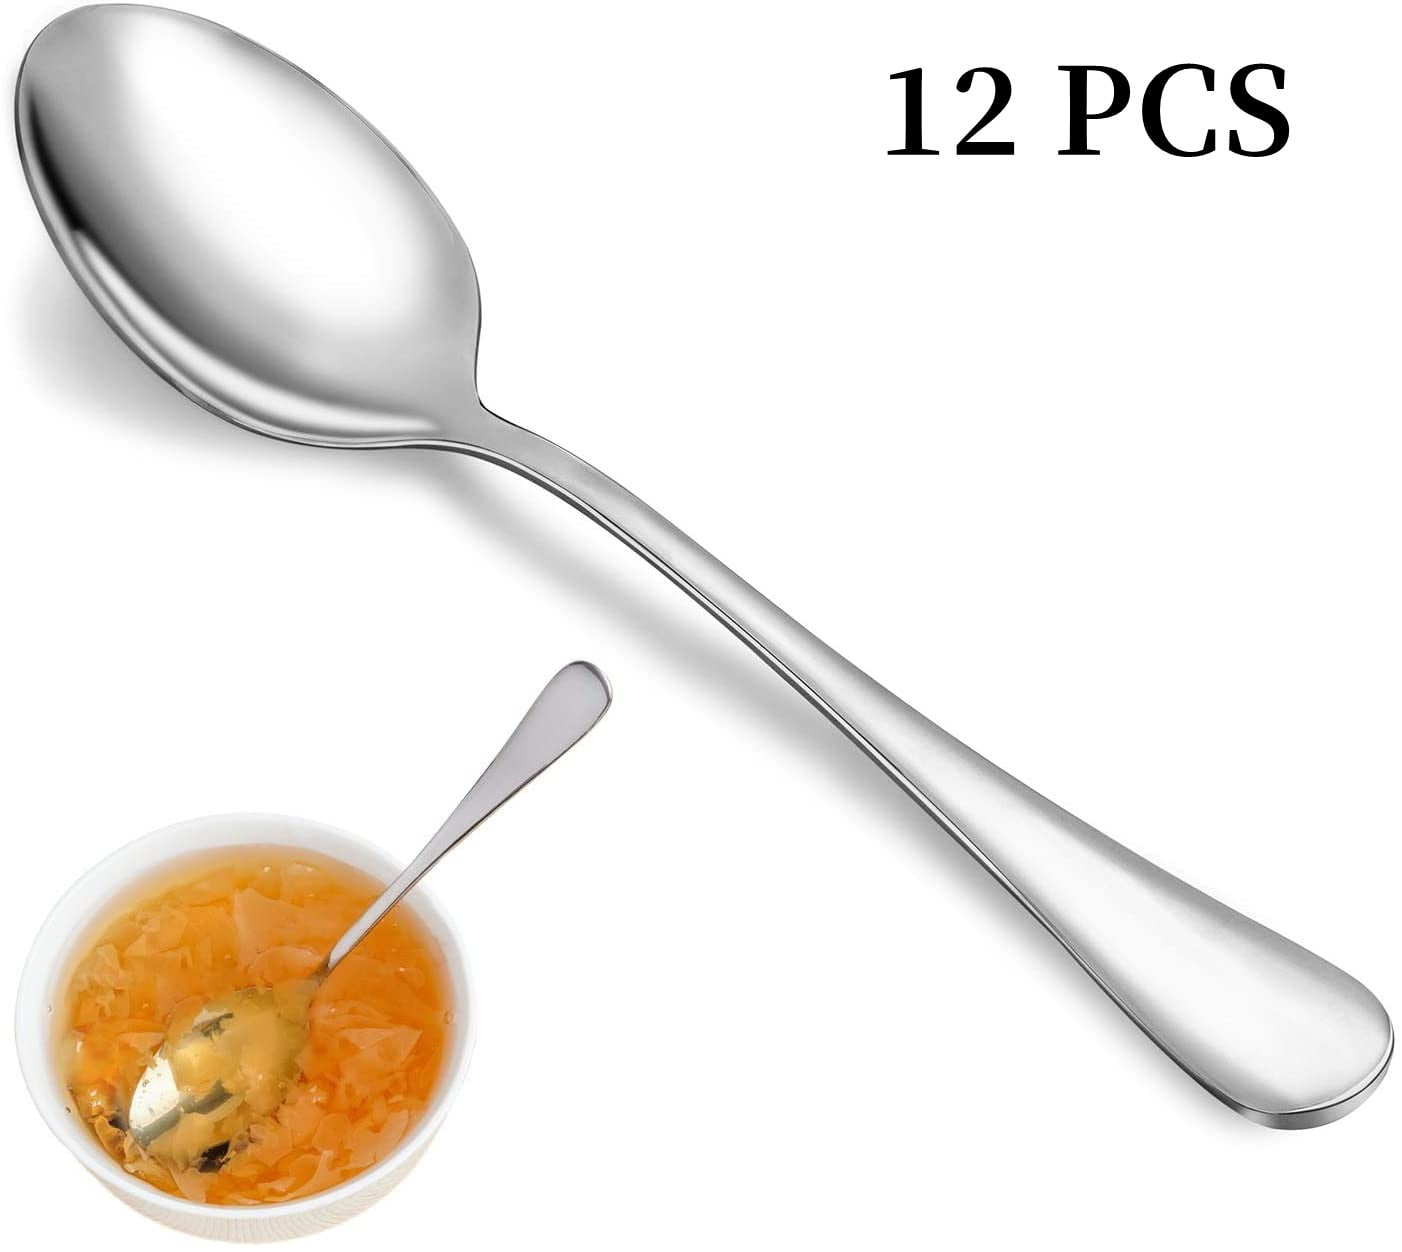 Yonger 1 Pcs Dinner Spoons Stainless Steel Serving Round Tablespoon for Home Kitchen or Restaurant Banquet S 